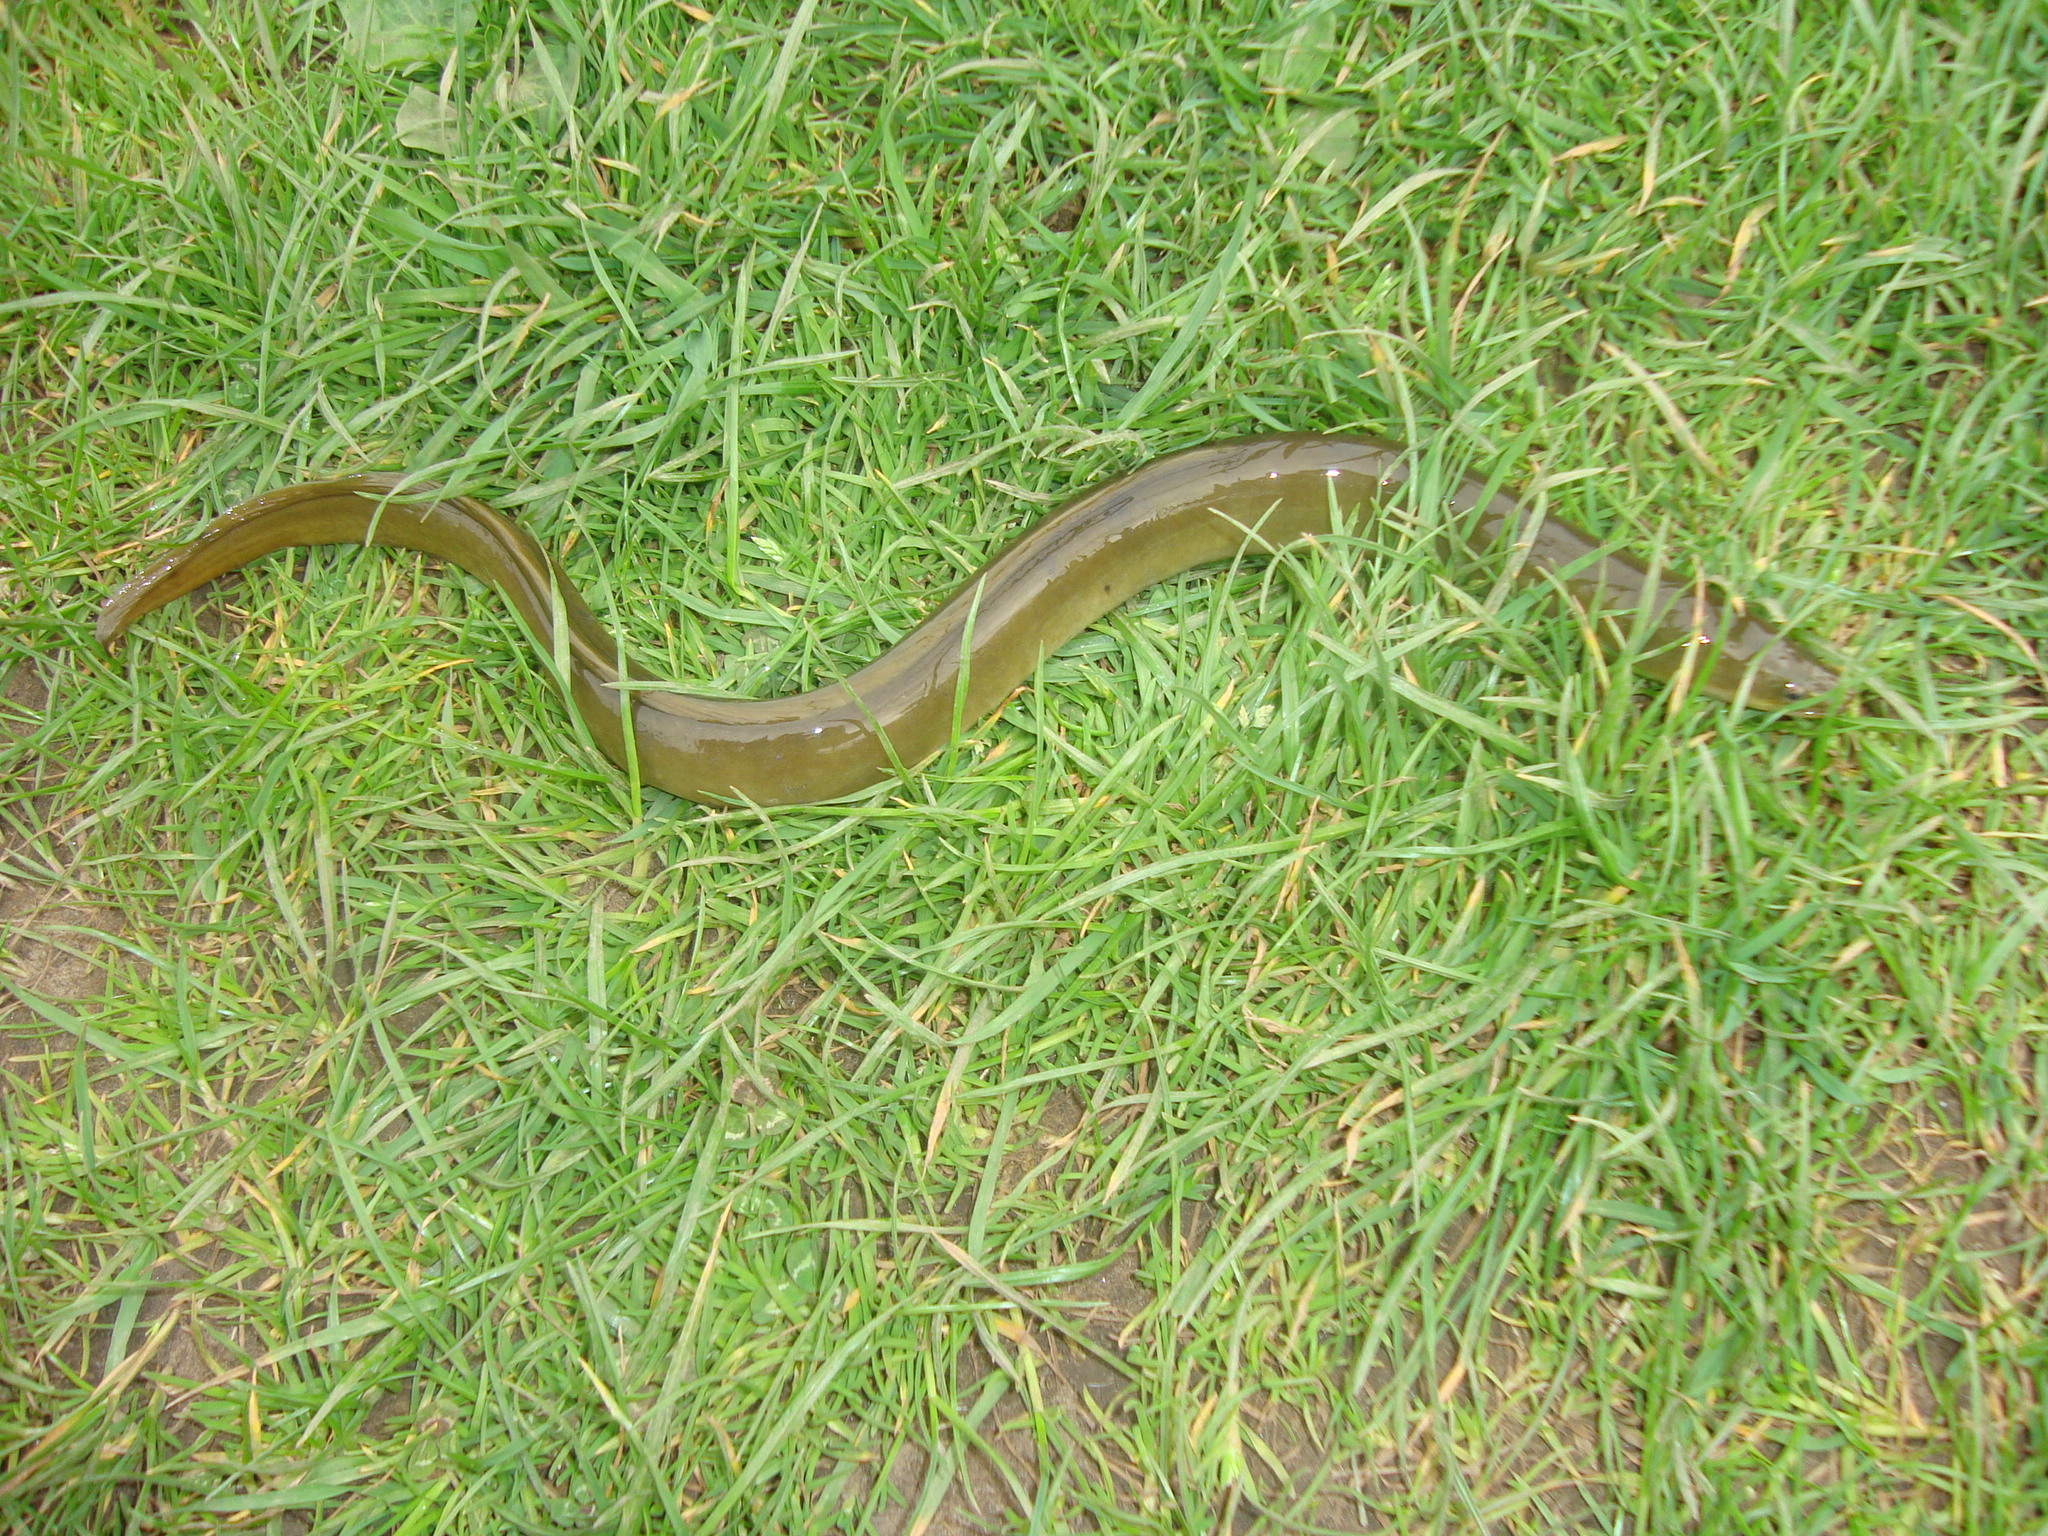 Eel sensing its way back to the river